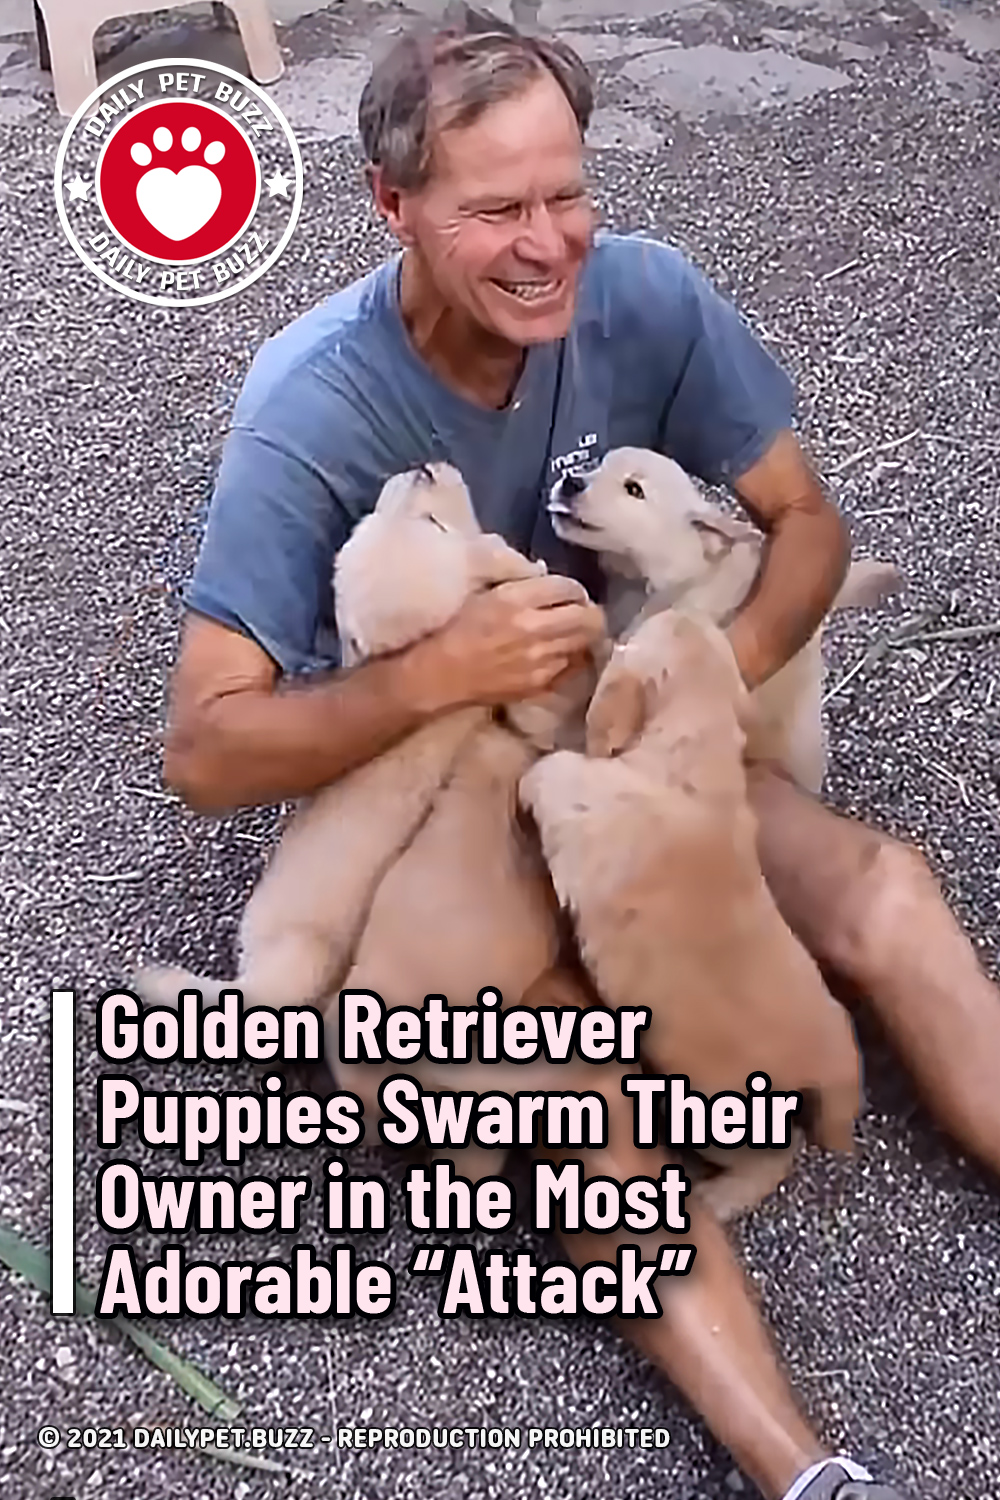 Golden Retriever Puppies Swarm Their Owner in the Most Adorable “Attack”